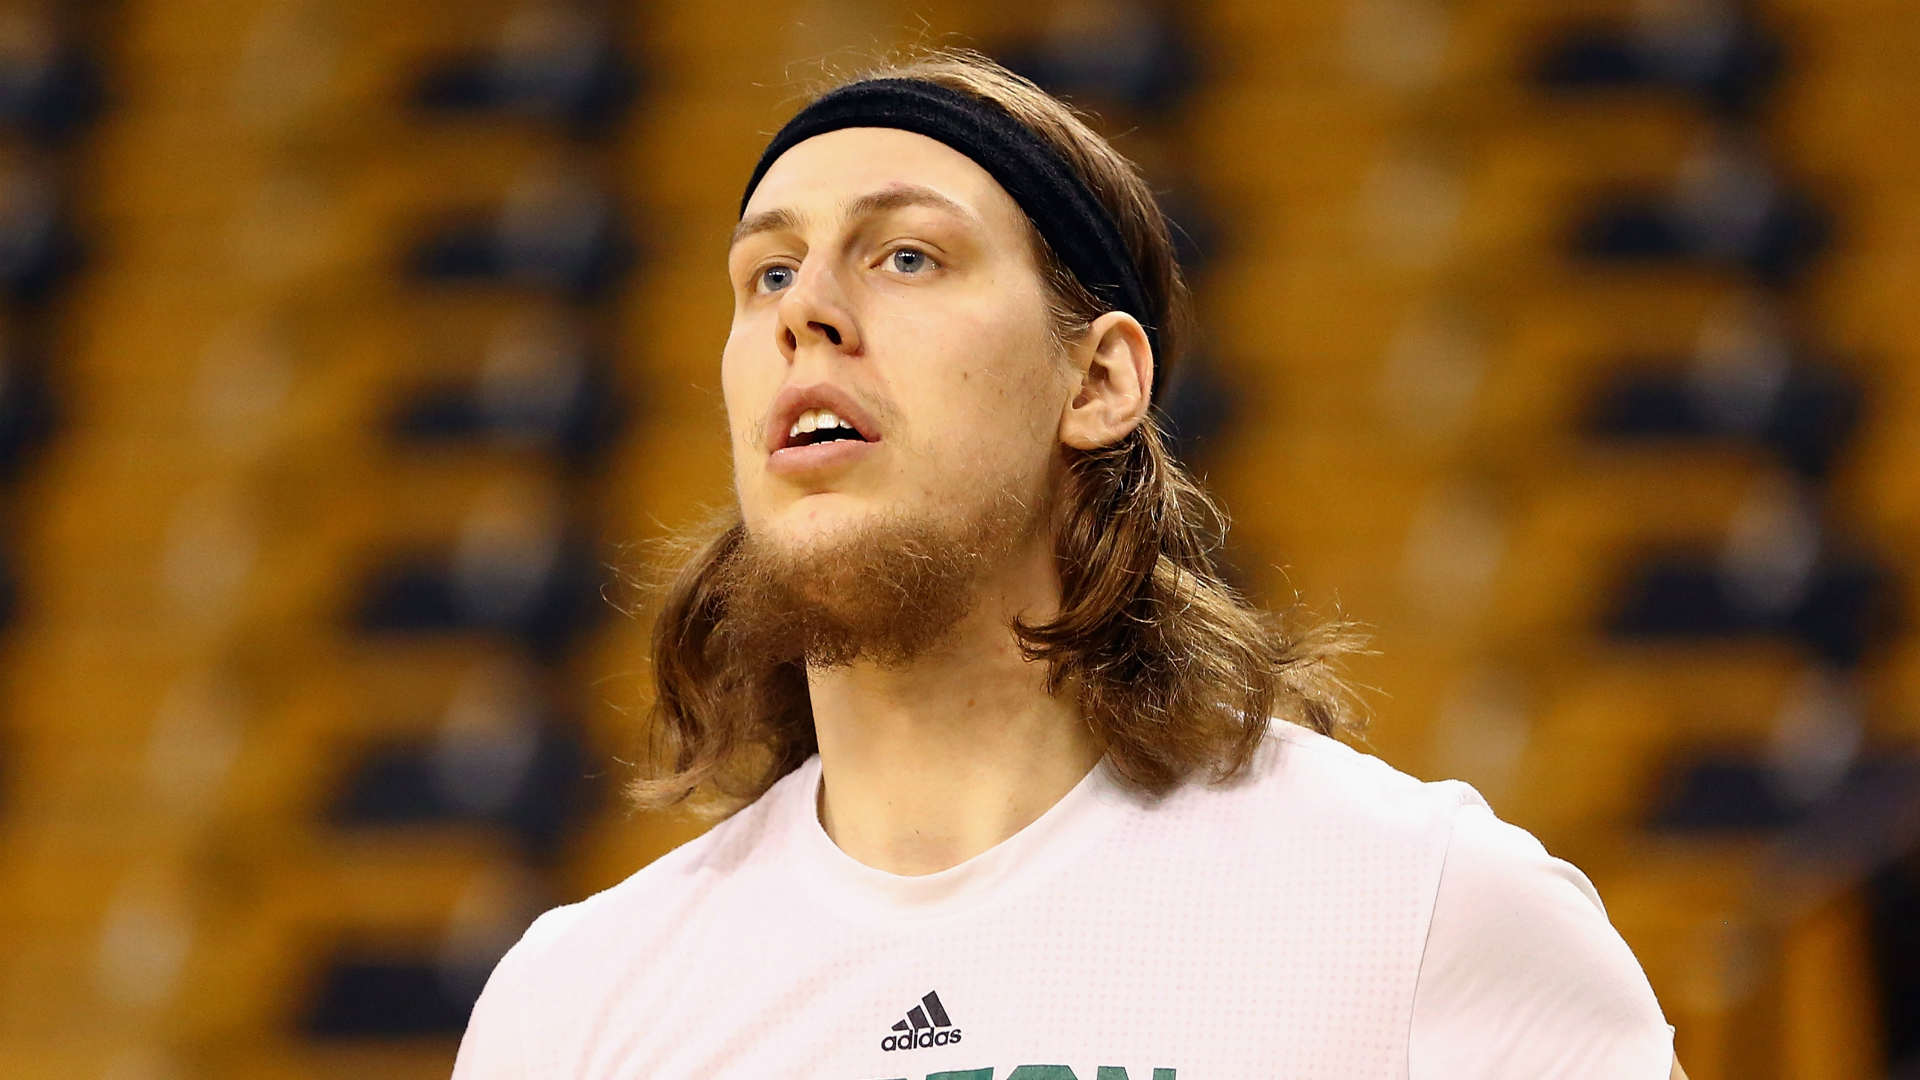 Kelly Olynyk taking his talents to South Beach